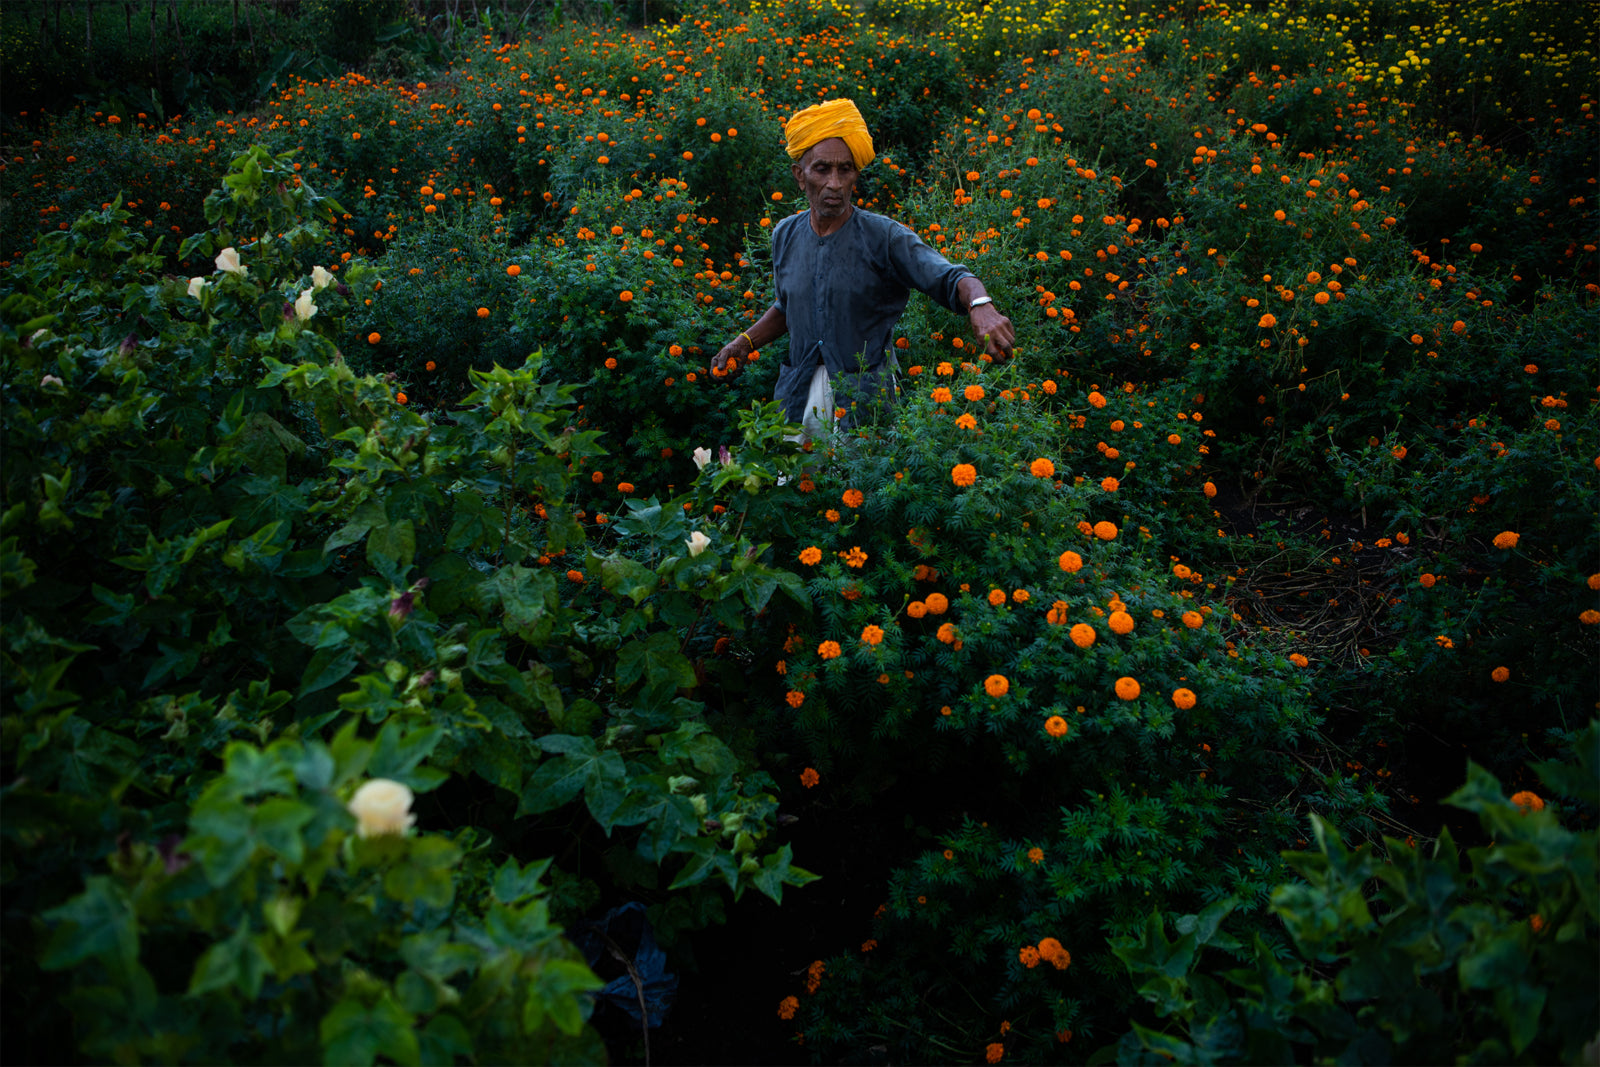 Amrathlal Chogalal Patidar plucks a few marigolds from the field, which are grown alongside the cotton. Marigolds help attract pests, and because they are an important flower for festivals and celebrations, can be sold by farmers as an additional cash crop. Photo: Hashim Badani.